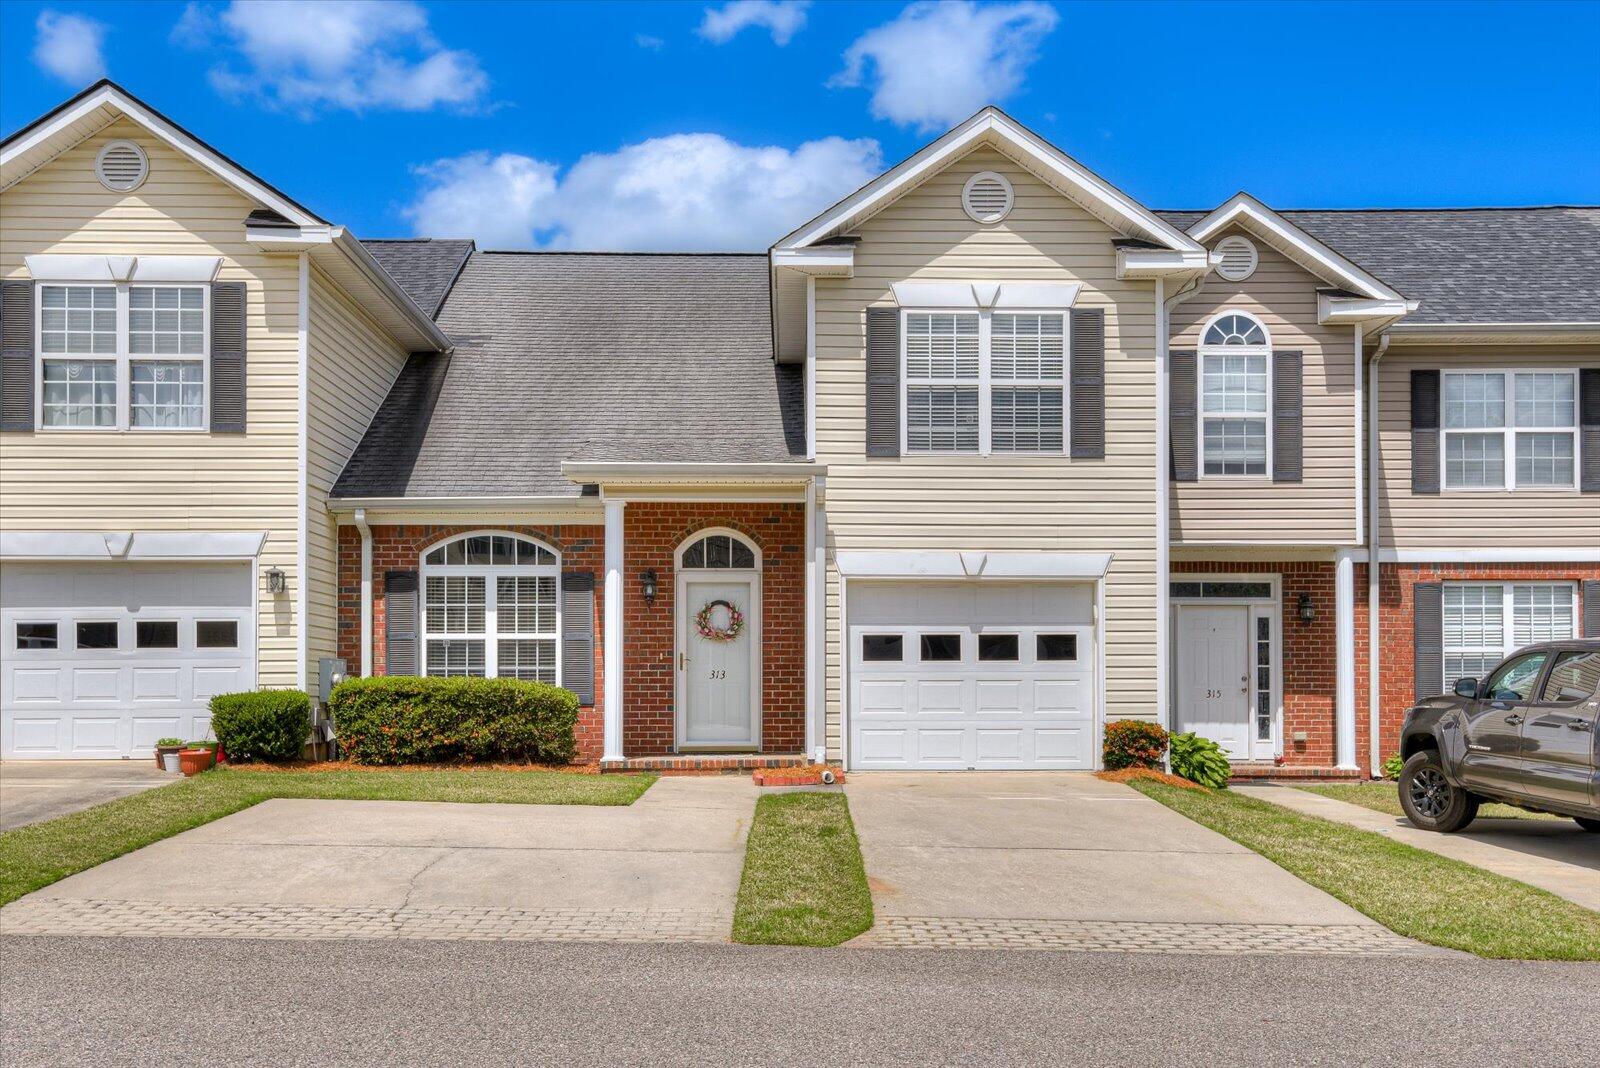 View Evans, GA 30809 townhome